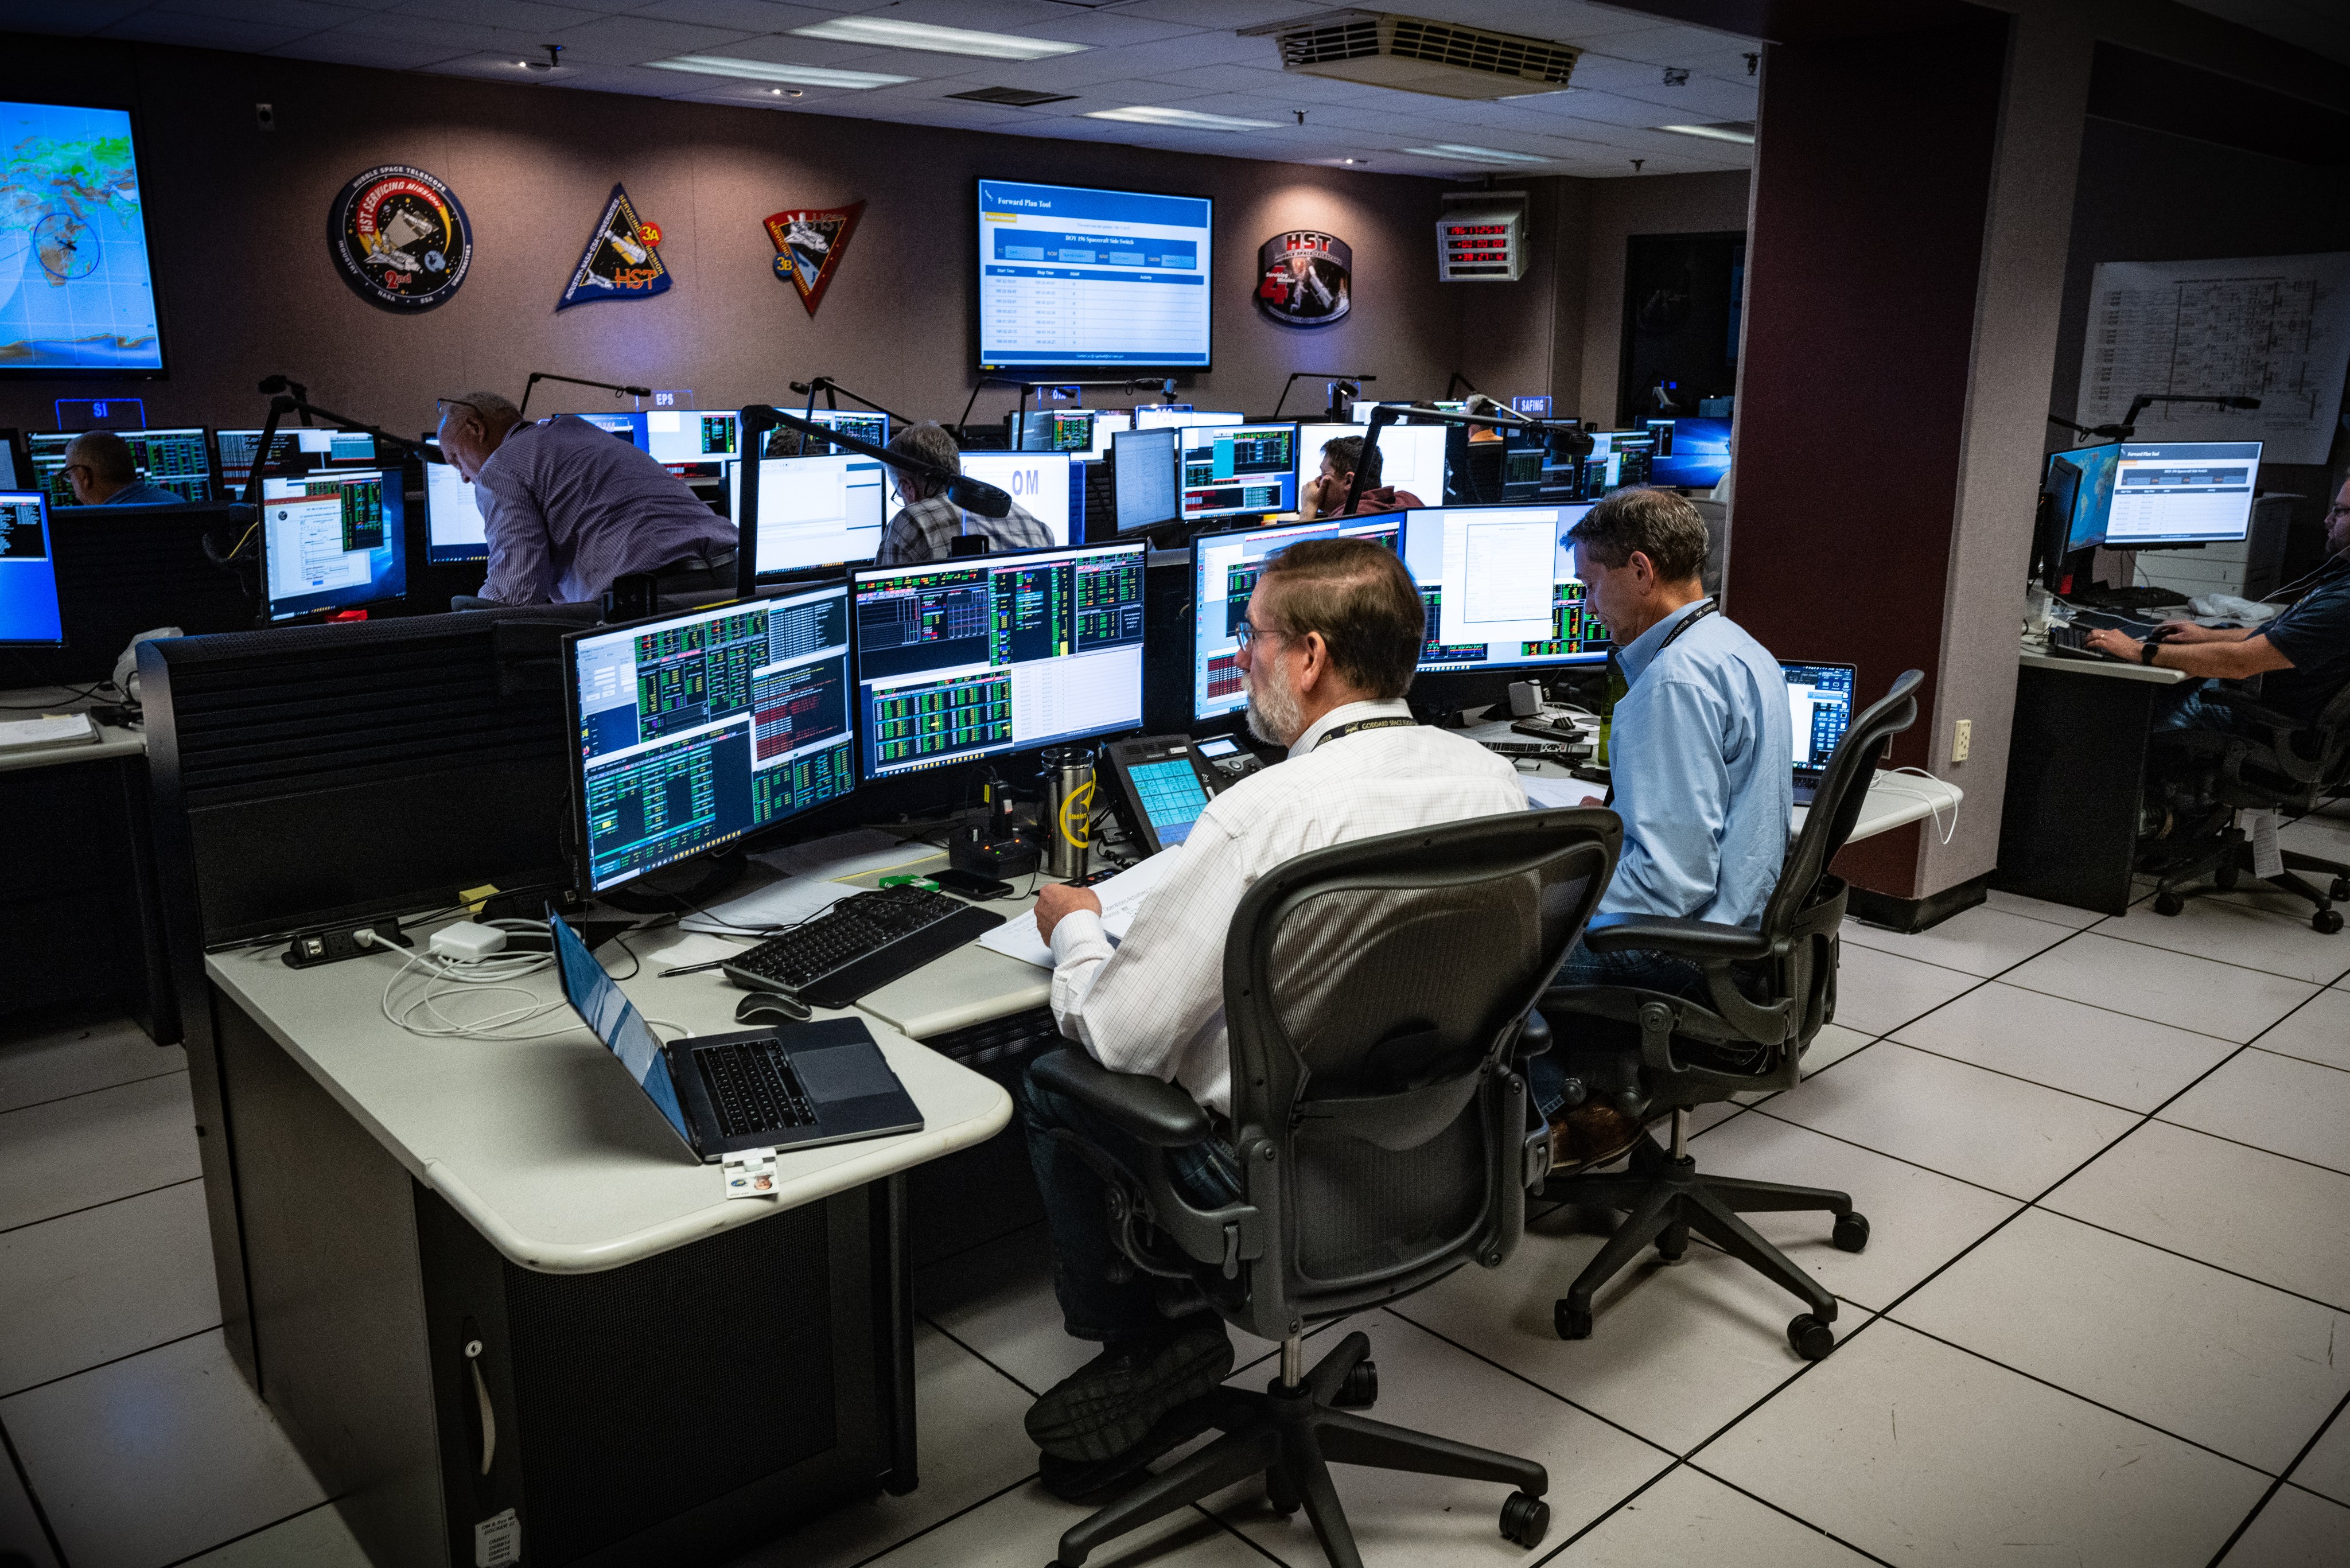 A operations room for Hubble with people looking at monitors.